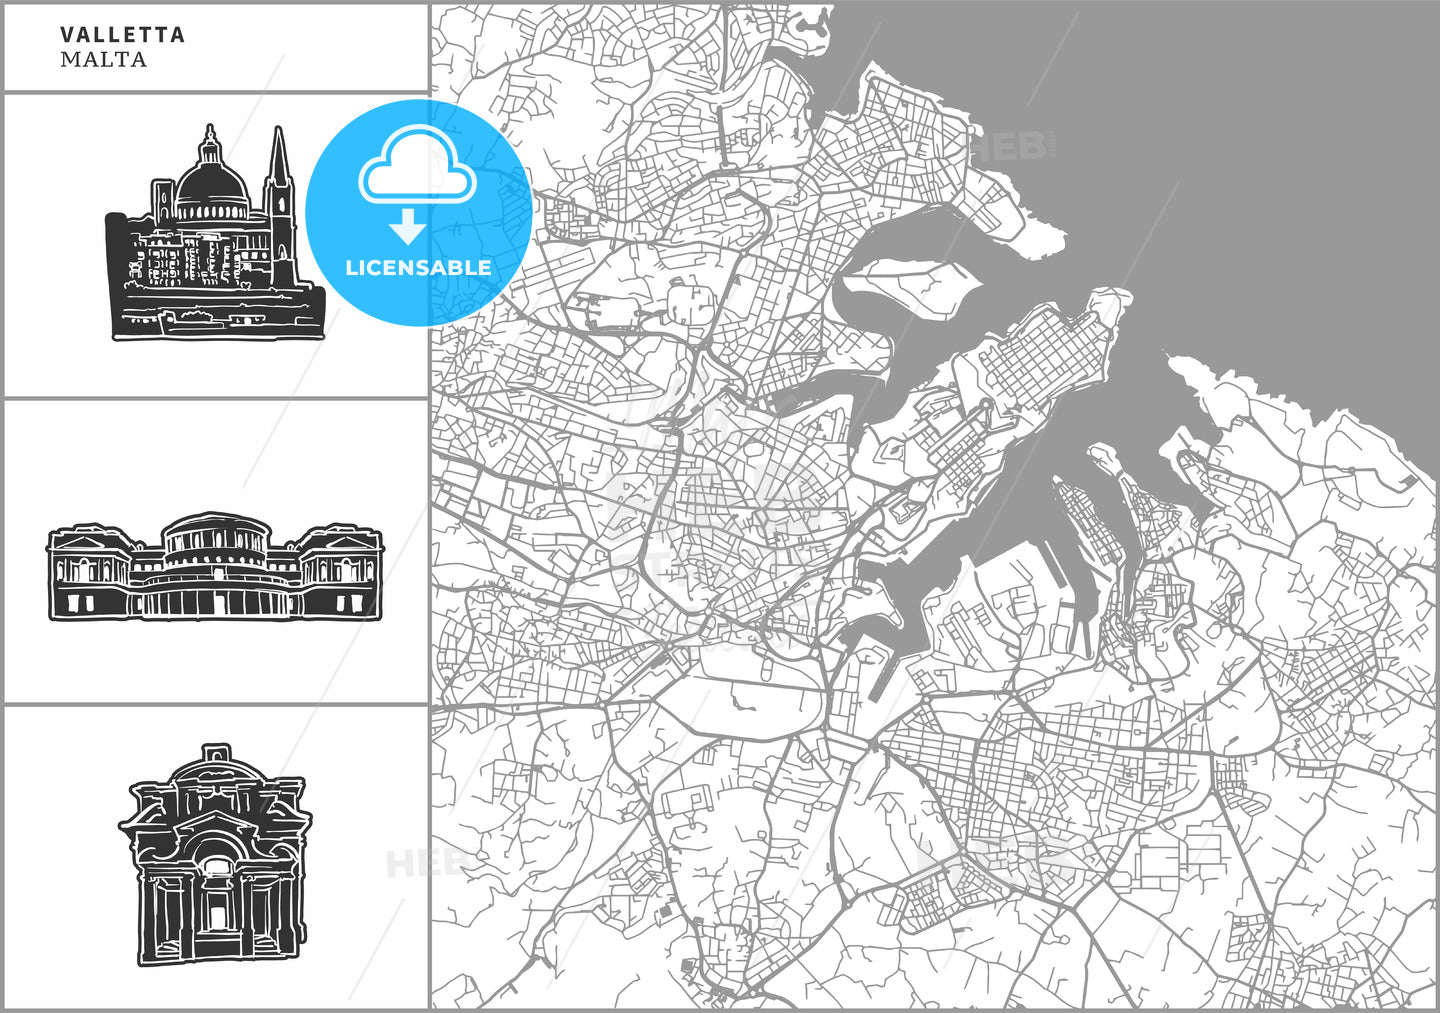 Valletta city map with hand-drawn architecture icons